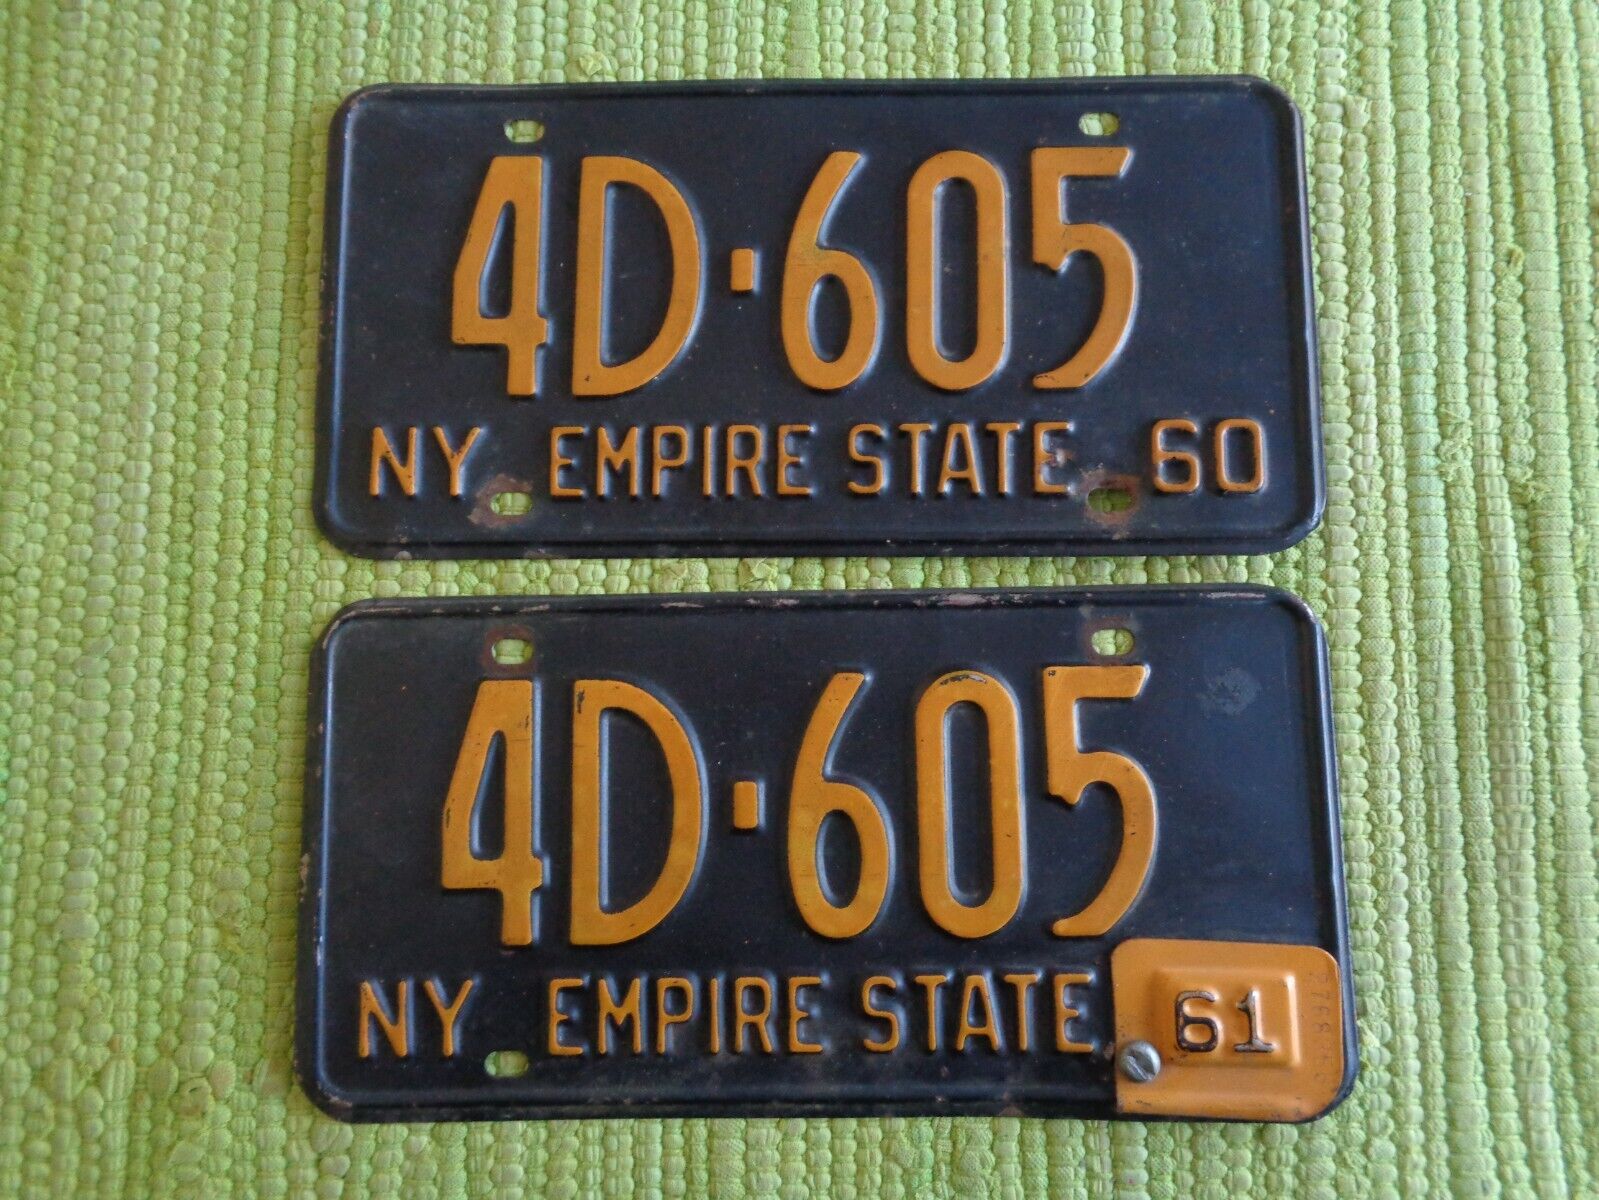 1960 w/ 61 Tag New York License Plate PAIR 60 1961 NY Tag Empire State 4D-605